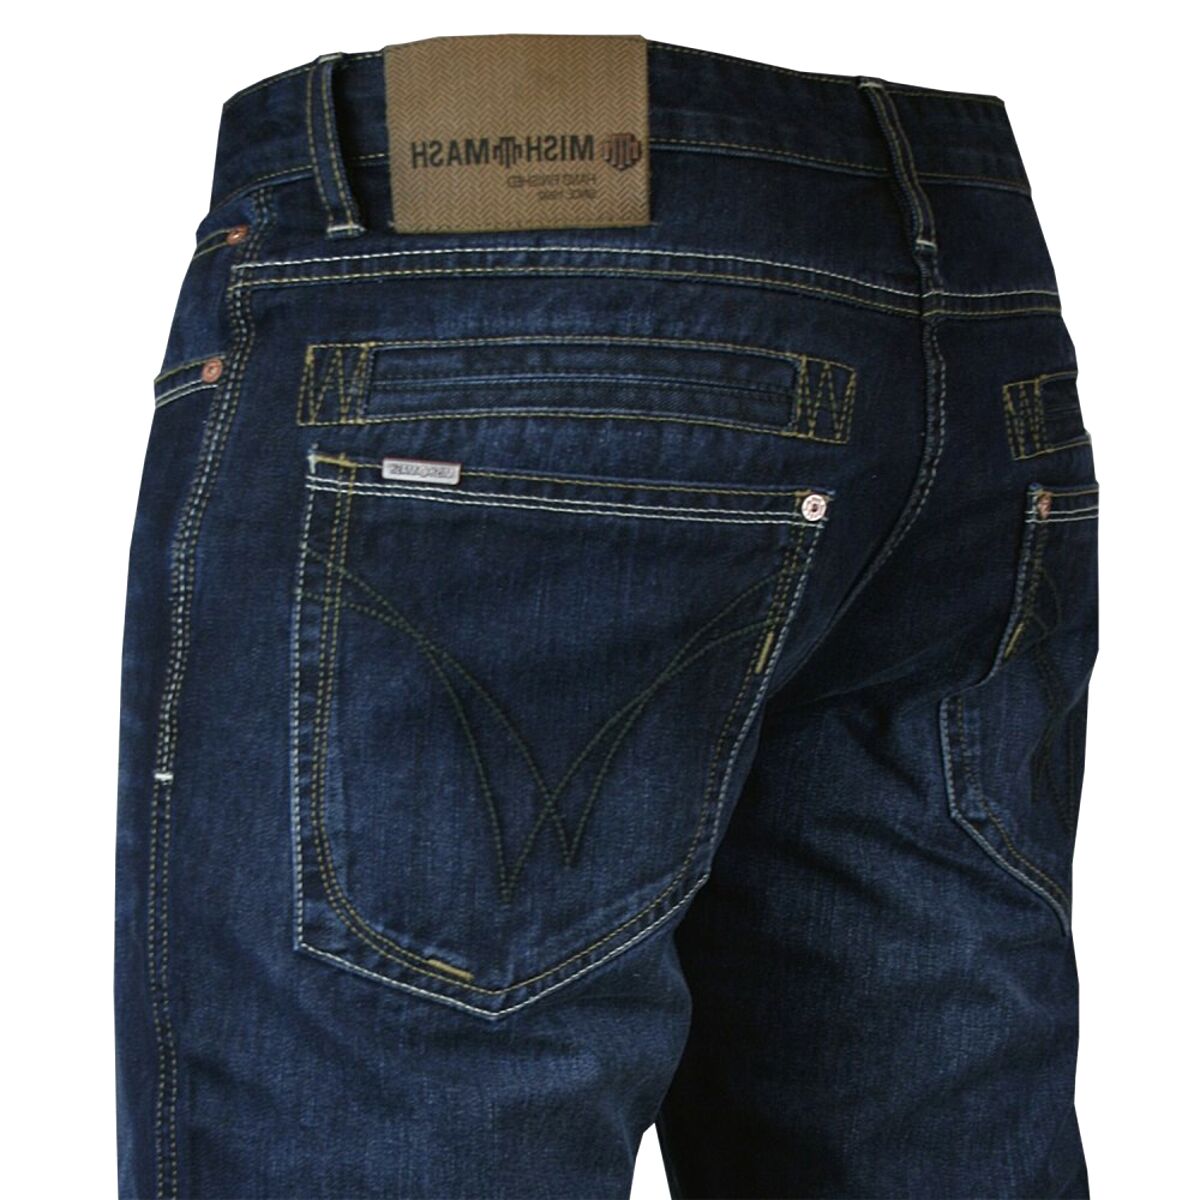 Mish Mash Jeans for sale in UK | 57 used Mish Mash Jeans